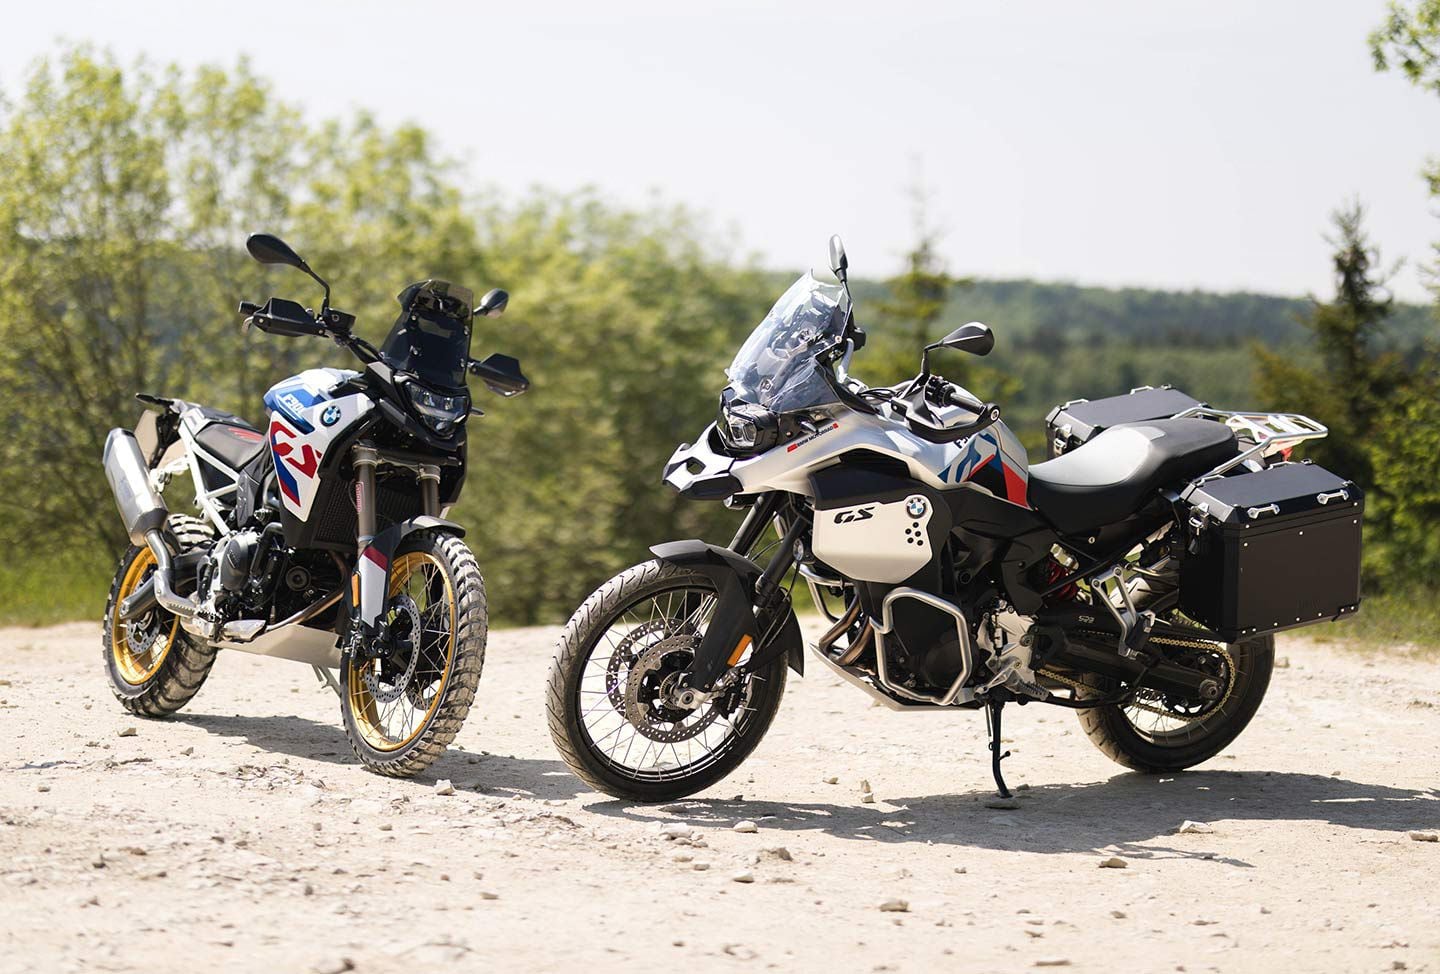 The 2024 BMW F 900 GS and F 900 GS Adventure in LightWhite Racing Blue (GS) and Ride Pro/White Aluminum (Adventure).